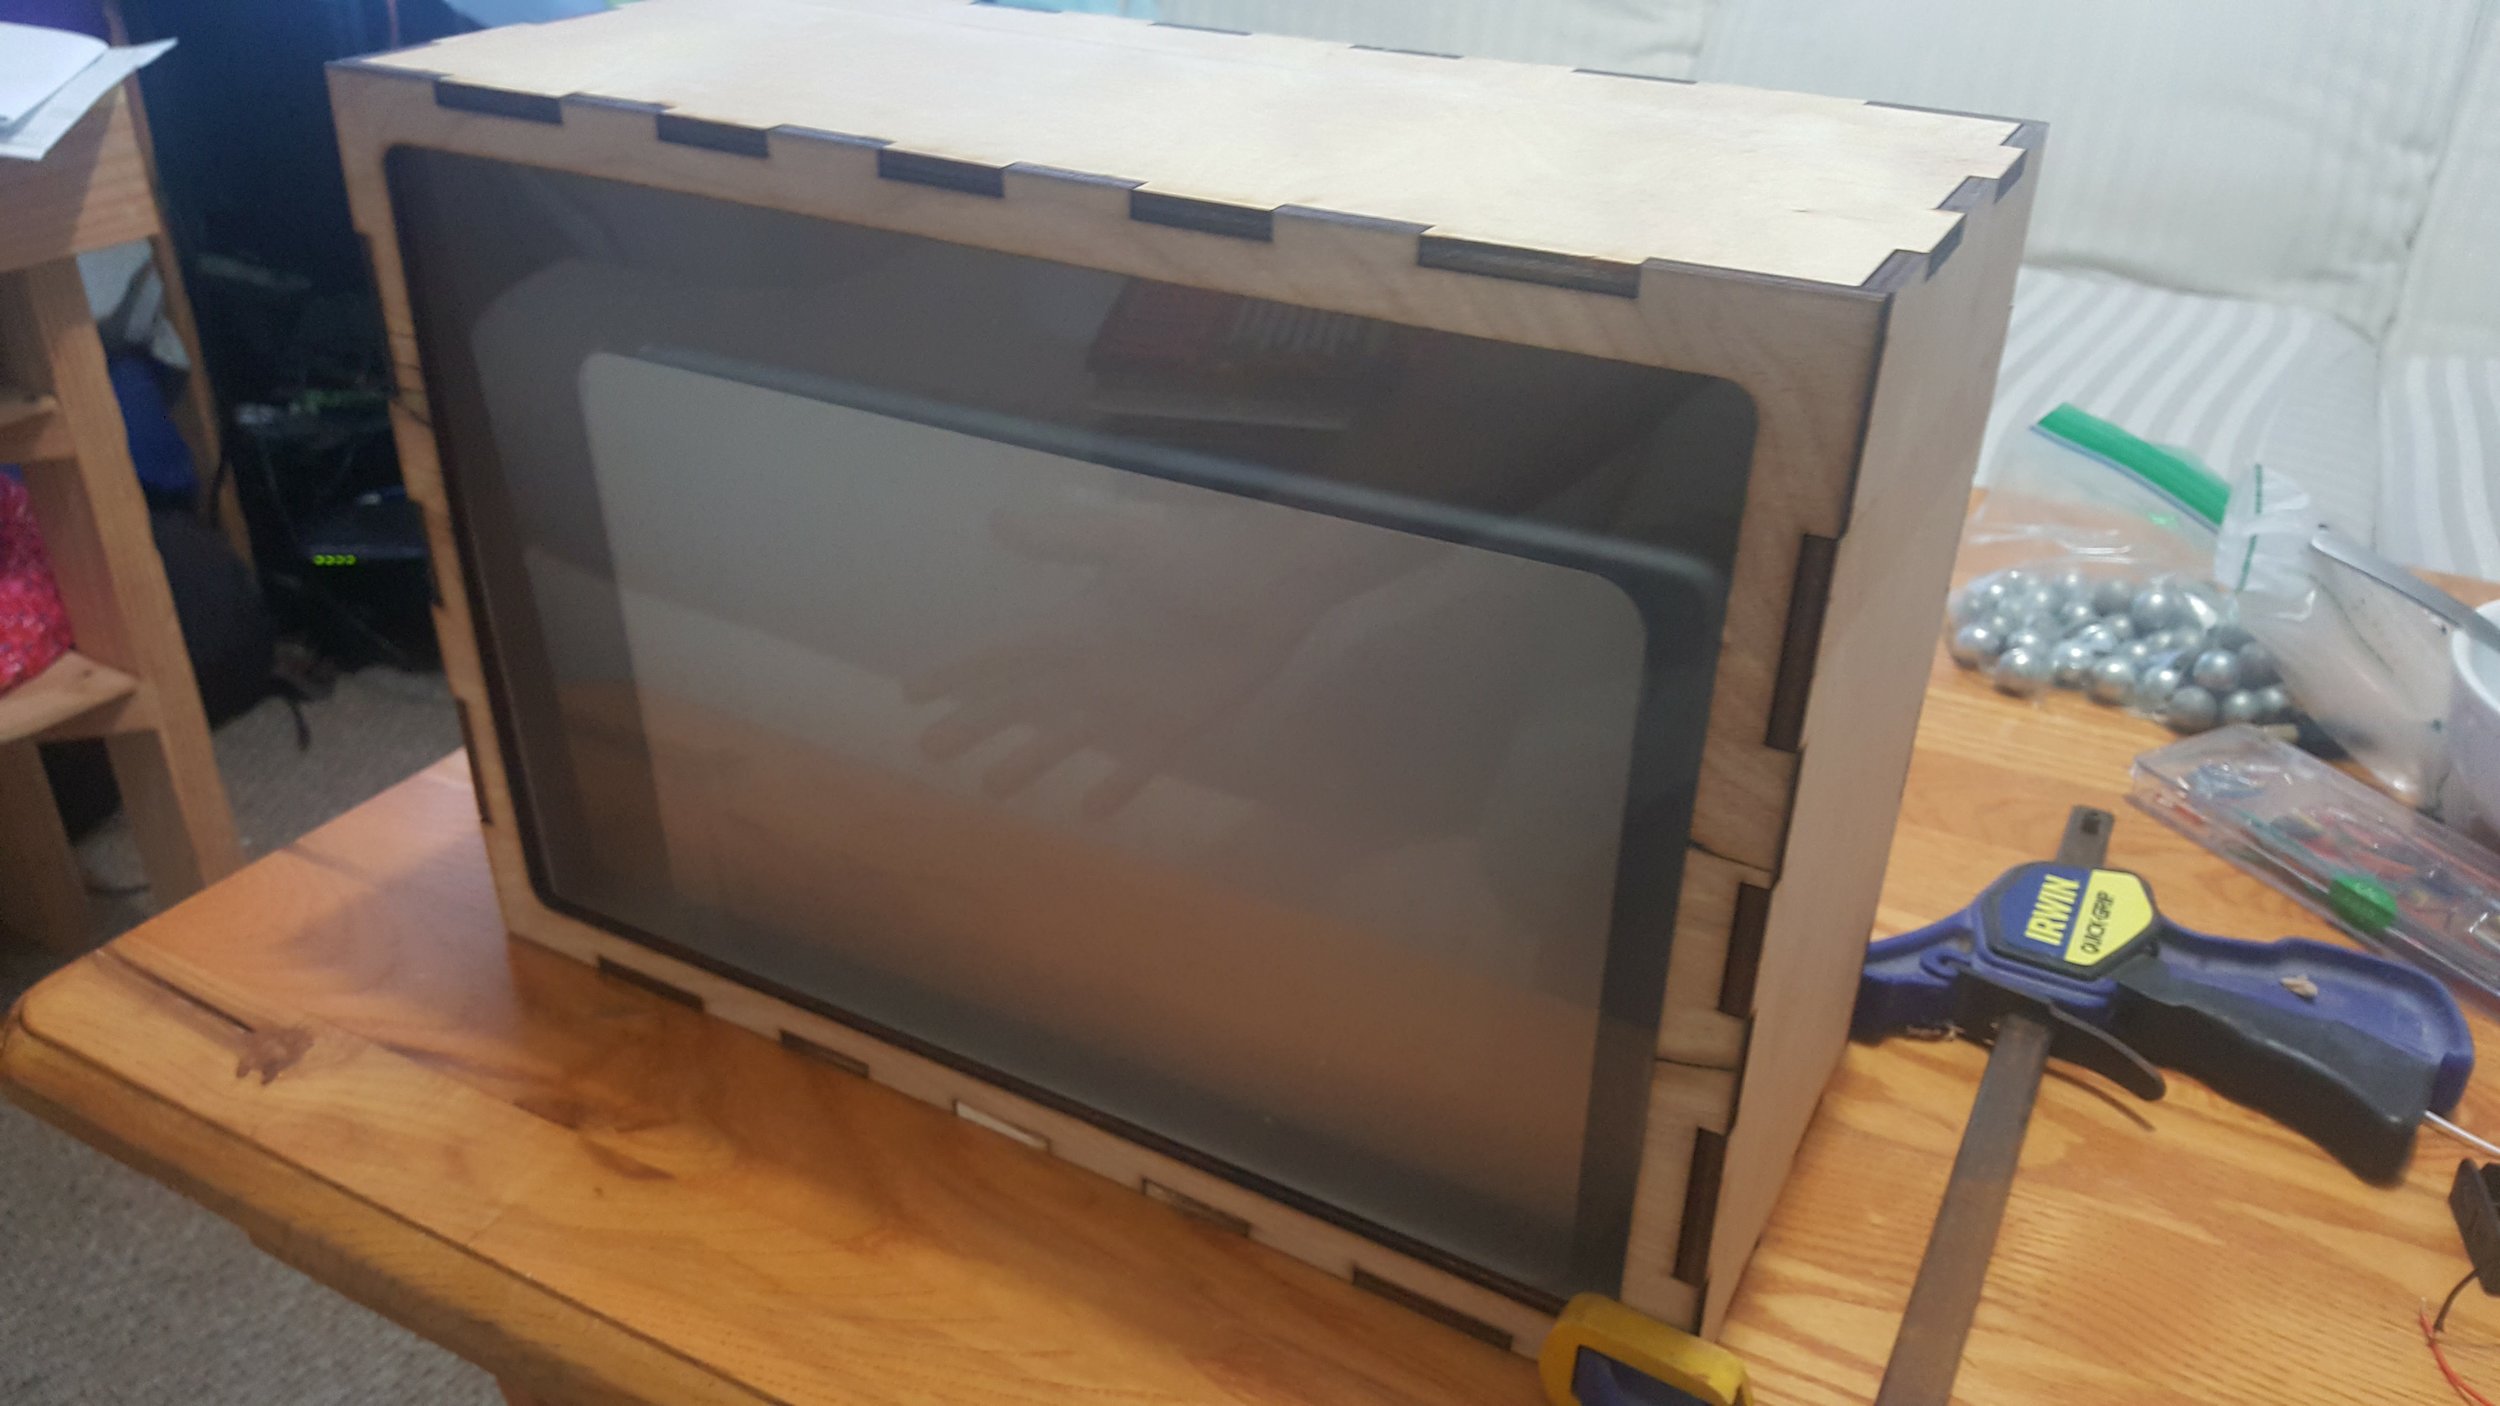 First box built before tablet obtained to test mirror film